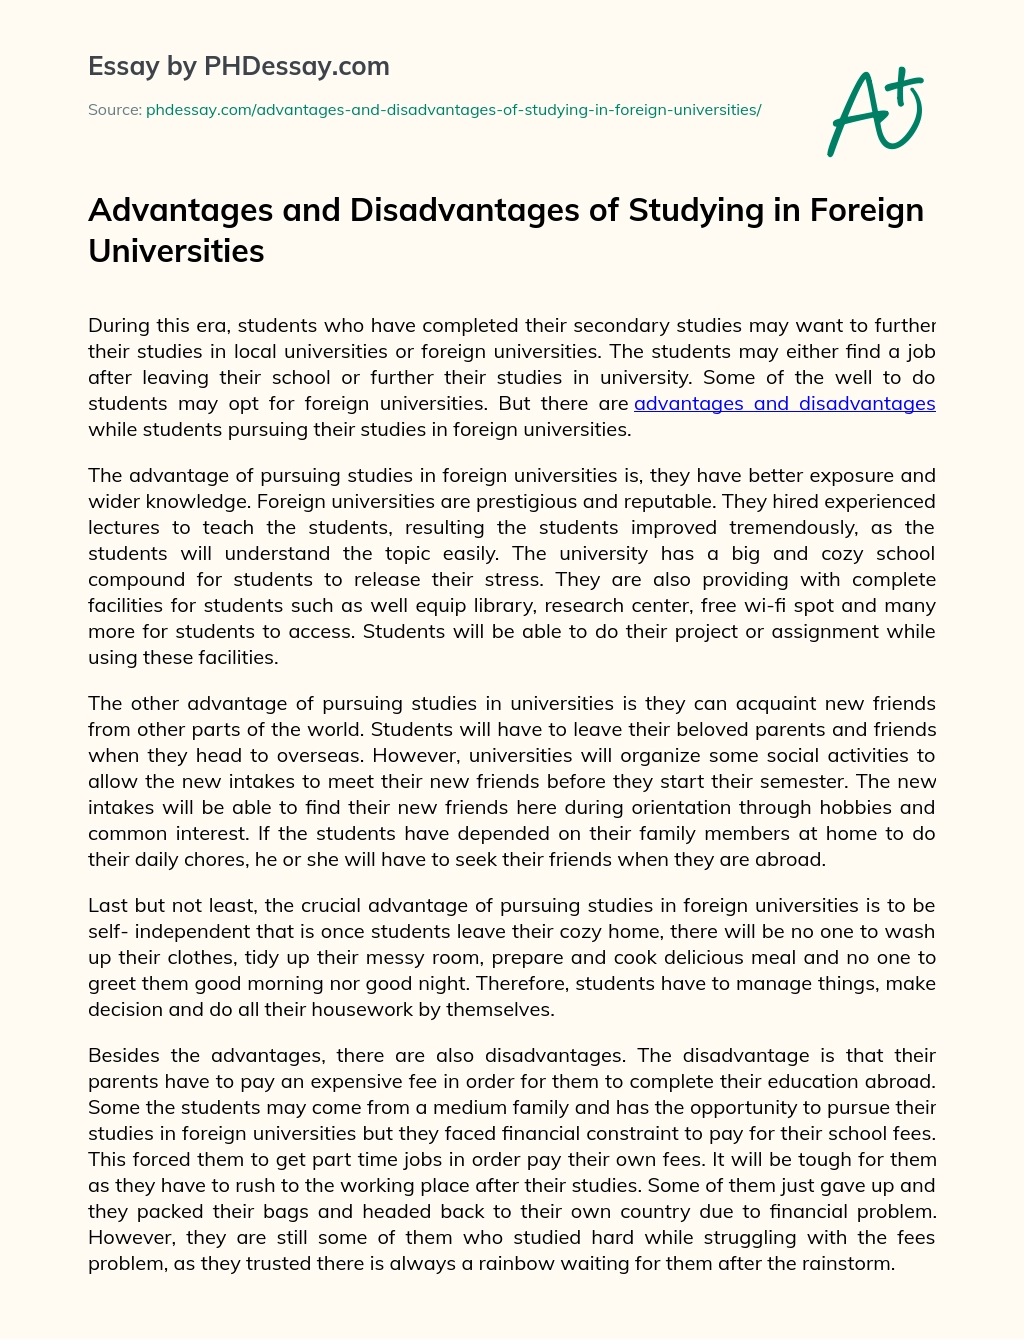 Advantages and Disadvantages of Studying in Foreign Universities essay